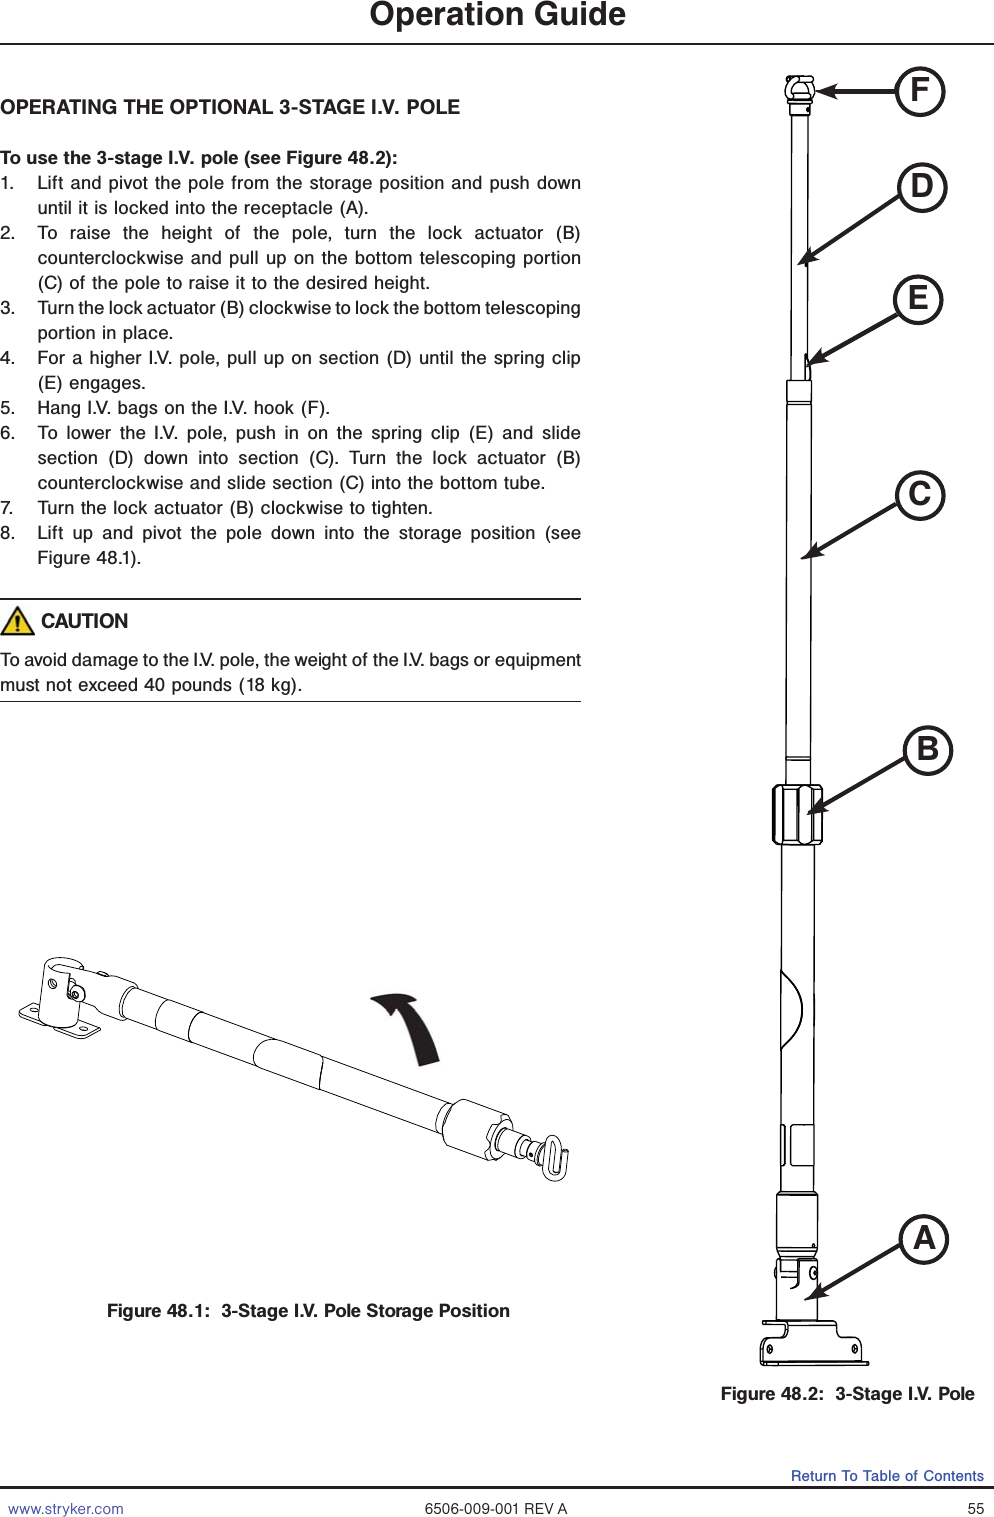 www.stryker.com 6506-009-001 REV A 55Return To Table of ContentsOperation GuideOPERATING THE OPTIONAL 3-STAGE I.V. POLE To use the 3-stage I.V. pole (see Figure 48.2):1.  Lift and pivot the pole from the storage position and push down until it is locked into the receptacle (A).2.  To raise the height of the pole, turn the lock actuator (B) counterclockwise and pull up on the bottom telescoping portion (C) of the pole to raise it to the desired height.3.  Turn the lock actuator (B) clockwise to lock the bottom telescoping portion in place.4.  For a higher I.V. pole, pull up on section (D) until the spring clip (E) engages.5.  Hang I.V. bags on the I.V. hook (F).6.  To lower the I.V. pole, push in on the spring clip (E) and slide section (D) down into section (C). Turn the lock actuator (B) counterclockwise and slide section (C) into the bottom tube.7.  Turn the lock actuator (B) clockwise to tighten.8.  Lift up and pivot the pole down into the storage position (see Figure 48.1). CAUTIONTo avoid damage to the I.V. pole, the weight of the I.V. bags or equipment must not exceed 40 pounds (18 kg).Figure 48.1:  3-Stage I.V. Pole Storage PositionABCDEFFigure 48.2:  3-Stage I.V. PoleABCDFE